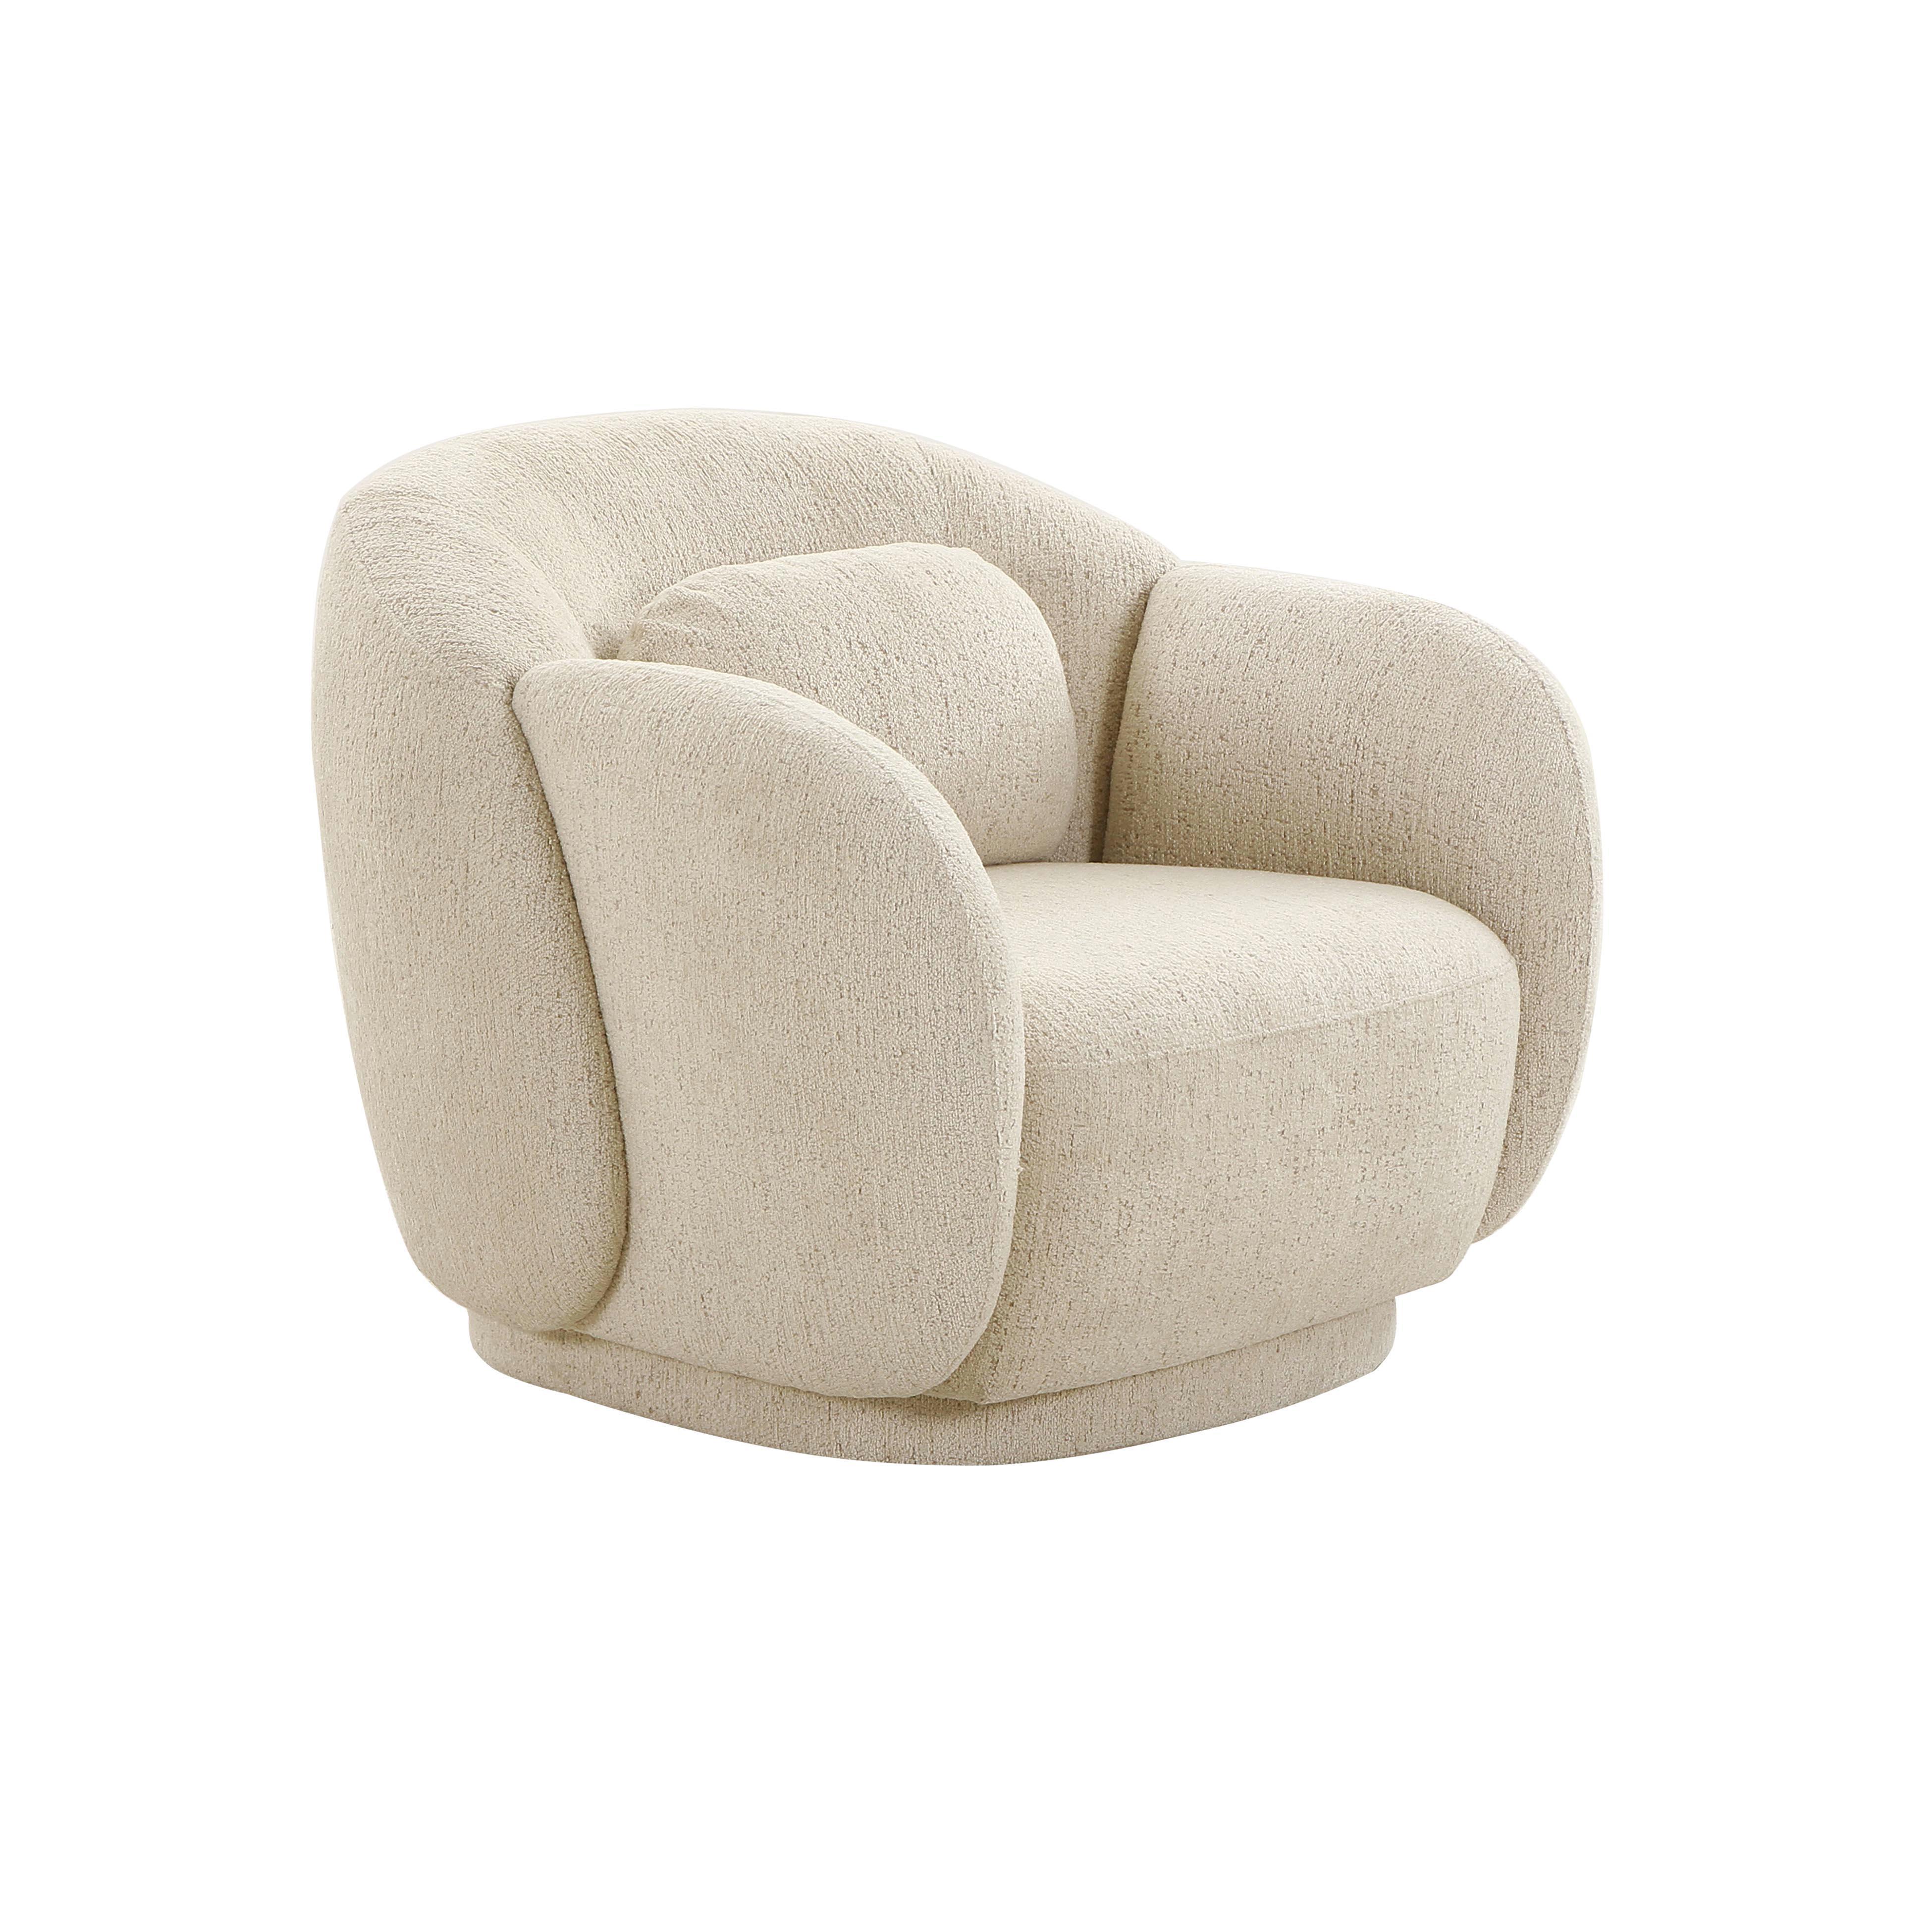 Tov Furniture Accent Chairs - Misty Cream Boucle Accent Chair